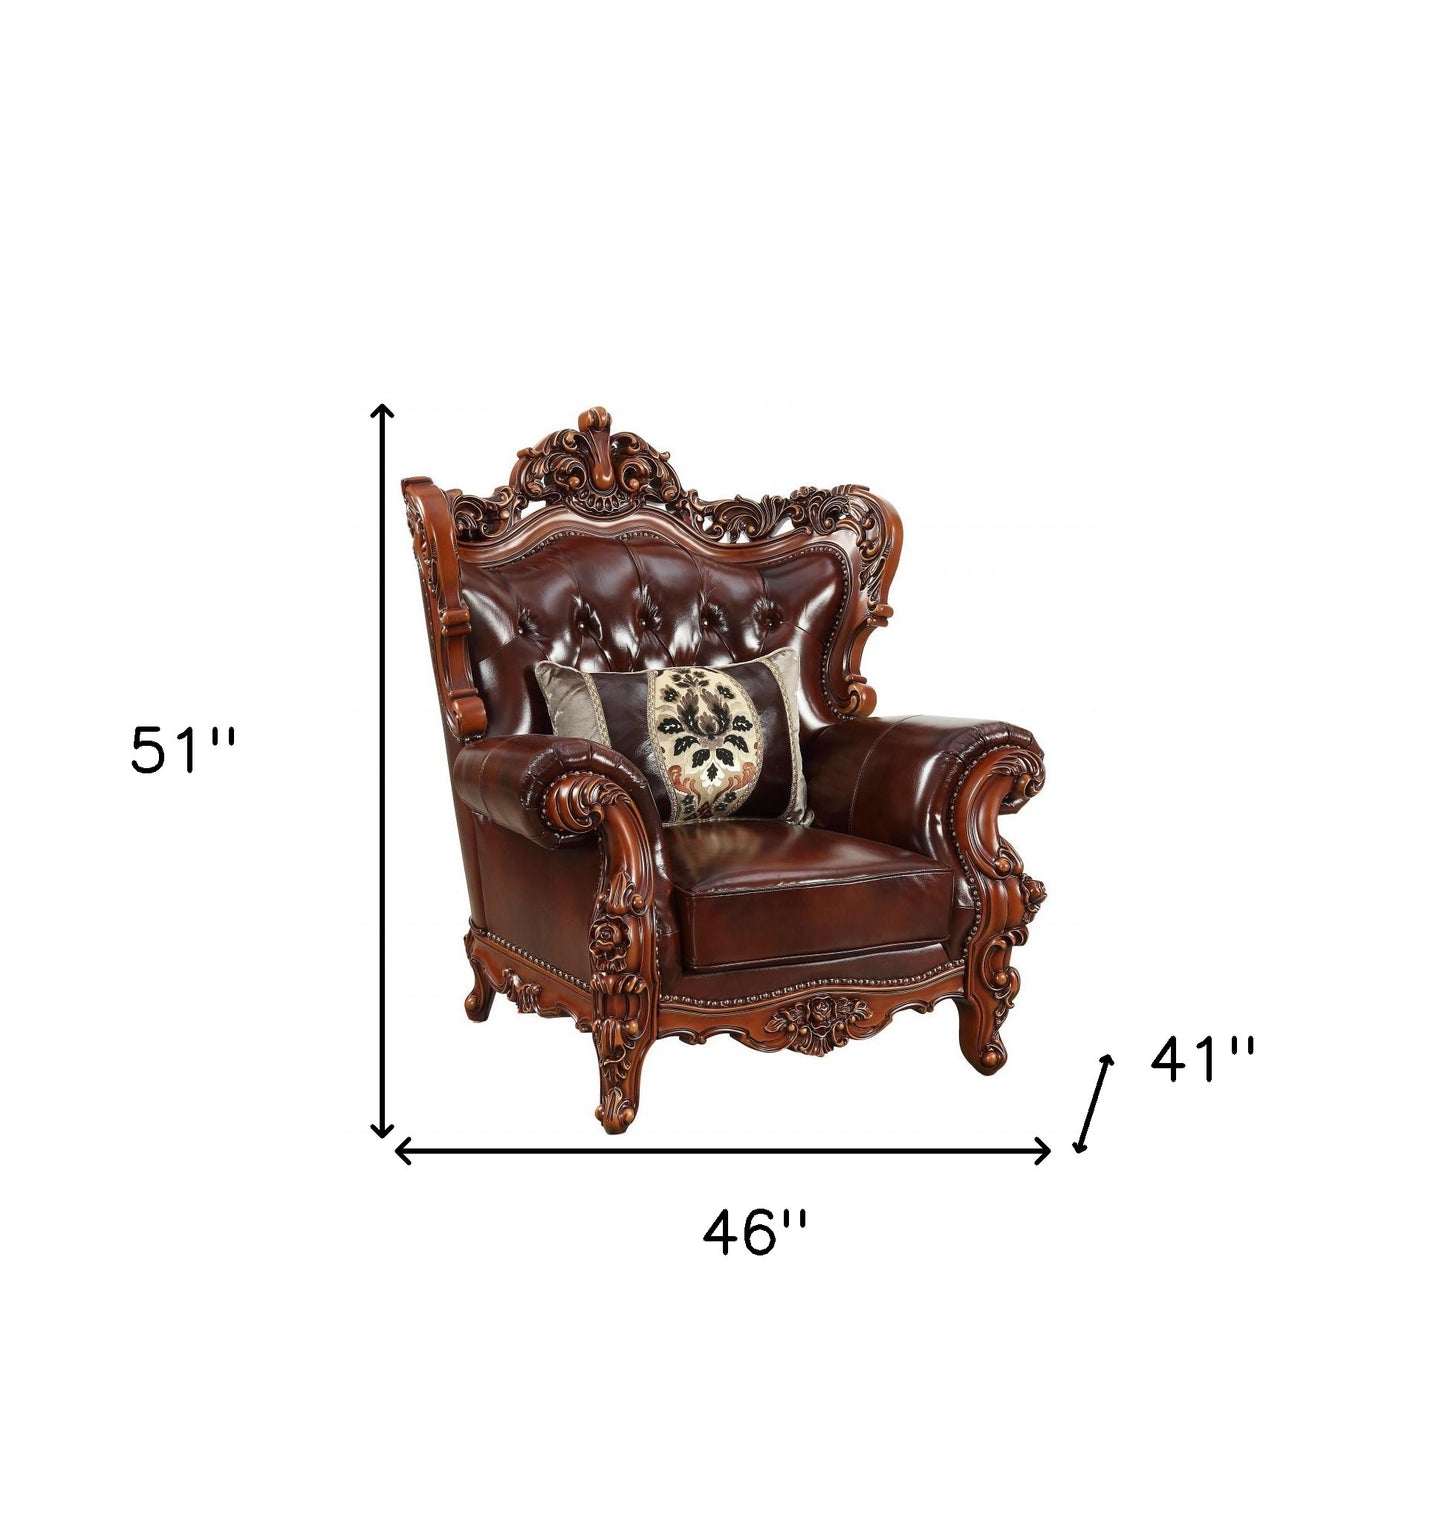 46" Dark Brown and Chocolate Faux Leather Tufted Wingback Chair